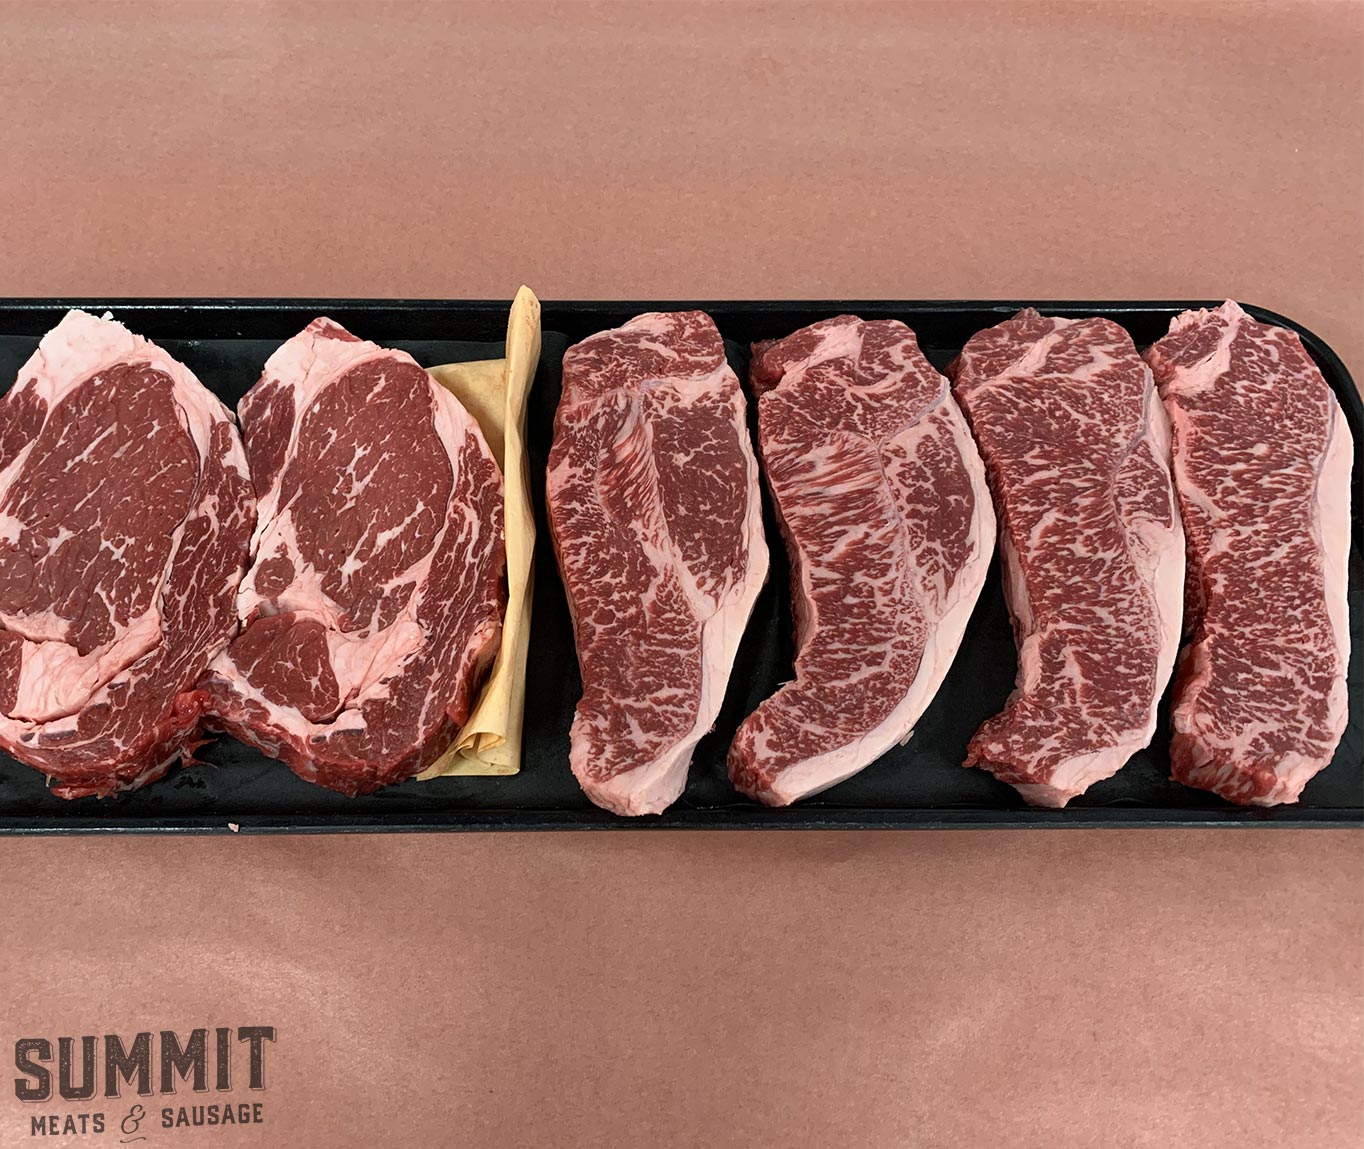 Photo of some Tajima Wagyu steaks from Summit Meats sitting on a tray atop some meat wrapping paper